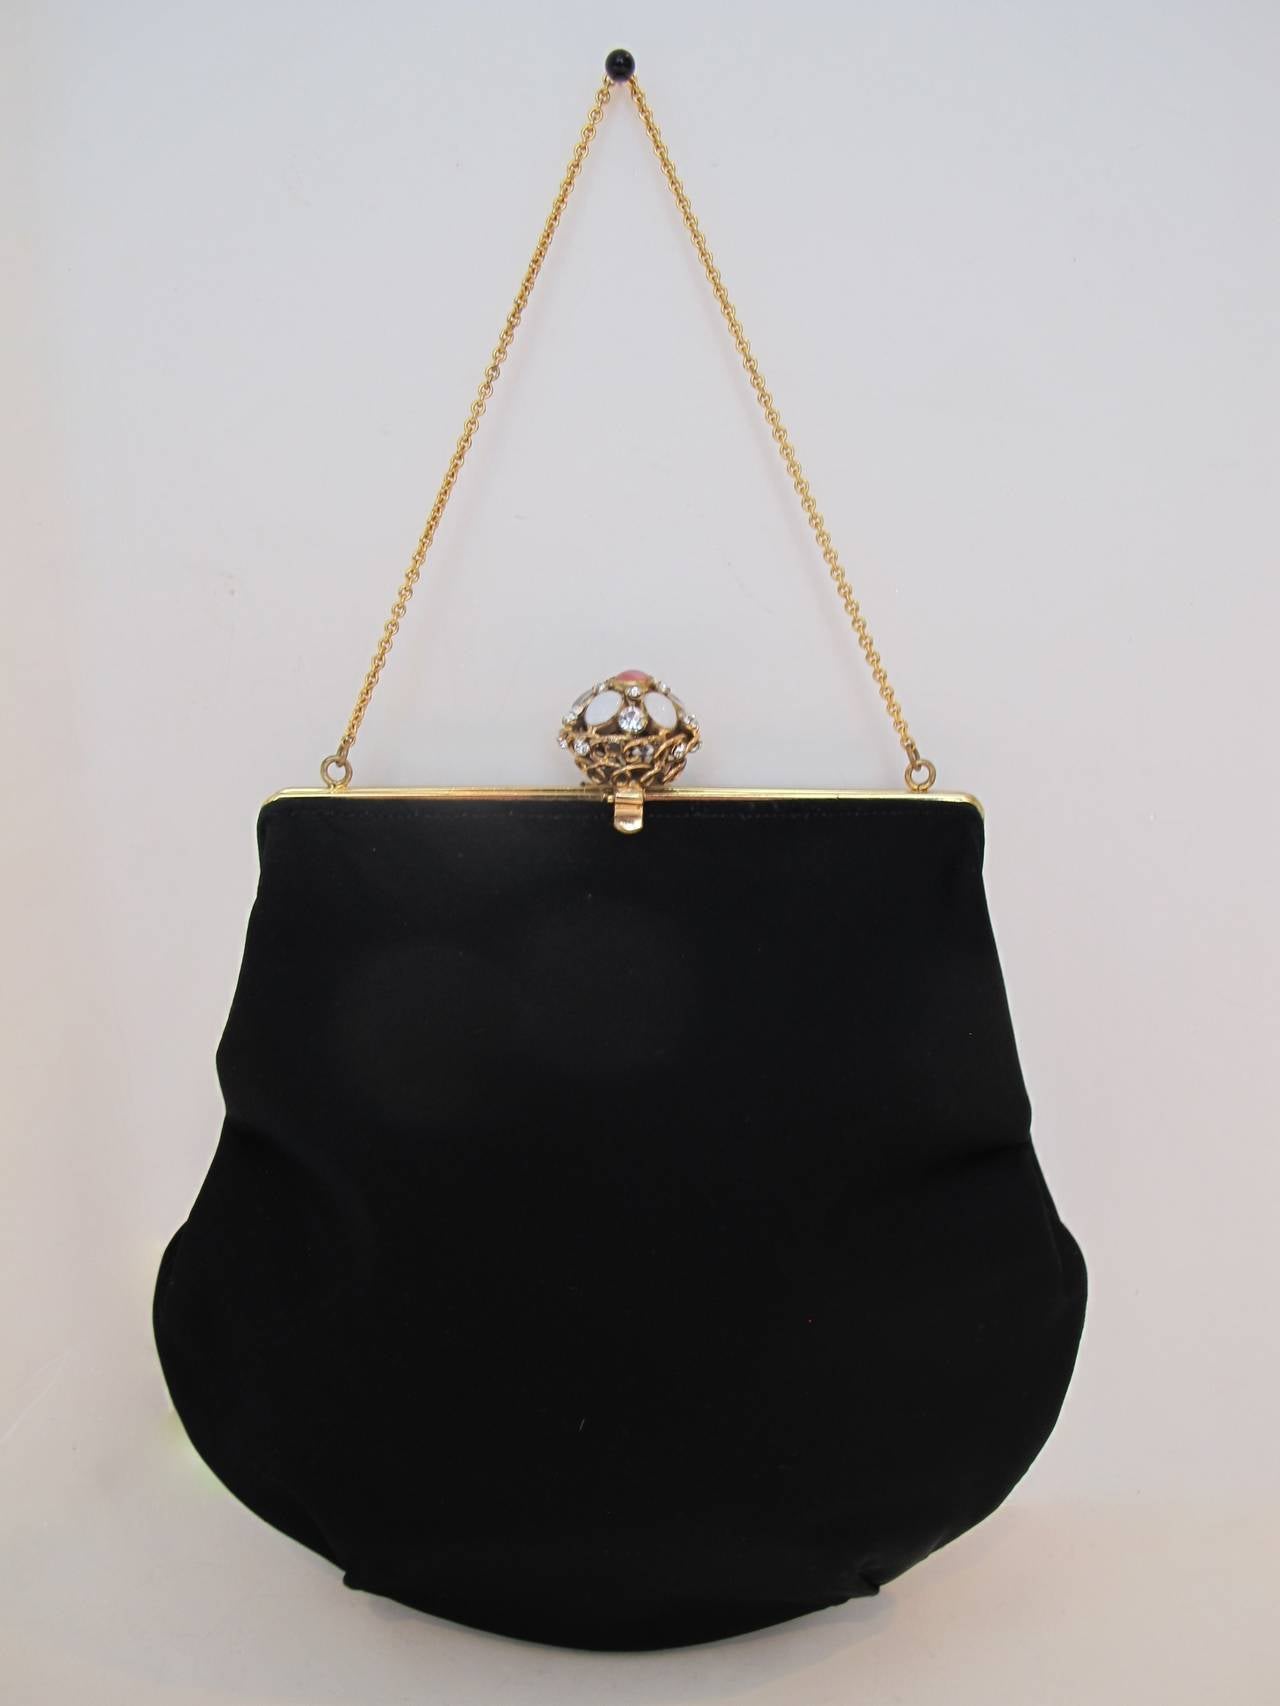 This is a rare, sophisticated Koret black satin hand-bag from the 1950's. During the 1950's, 1960's and 1970's, Koret was an exclusive elegant purchase and the quality and chic bags were purchased at Bergdorf Goodman, I. Magnin, Ransohoff's and